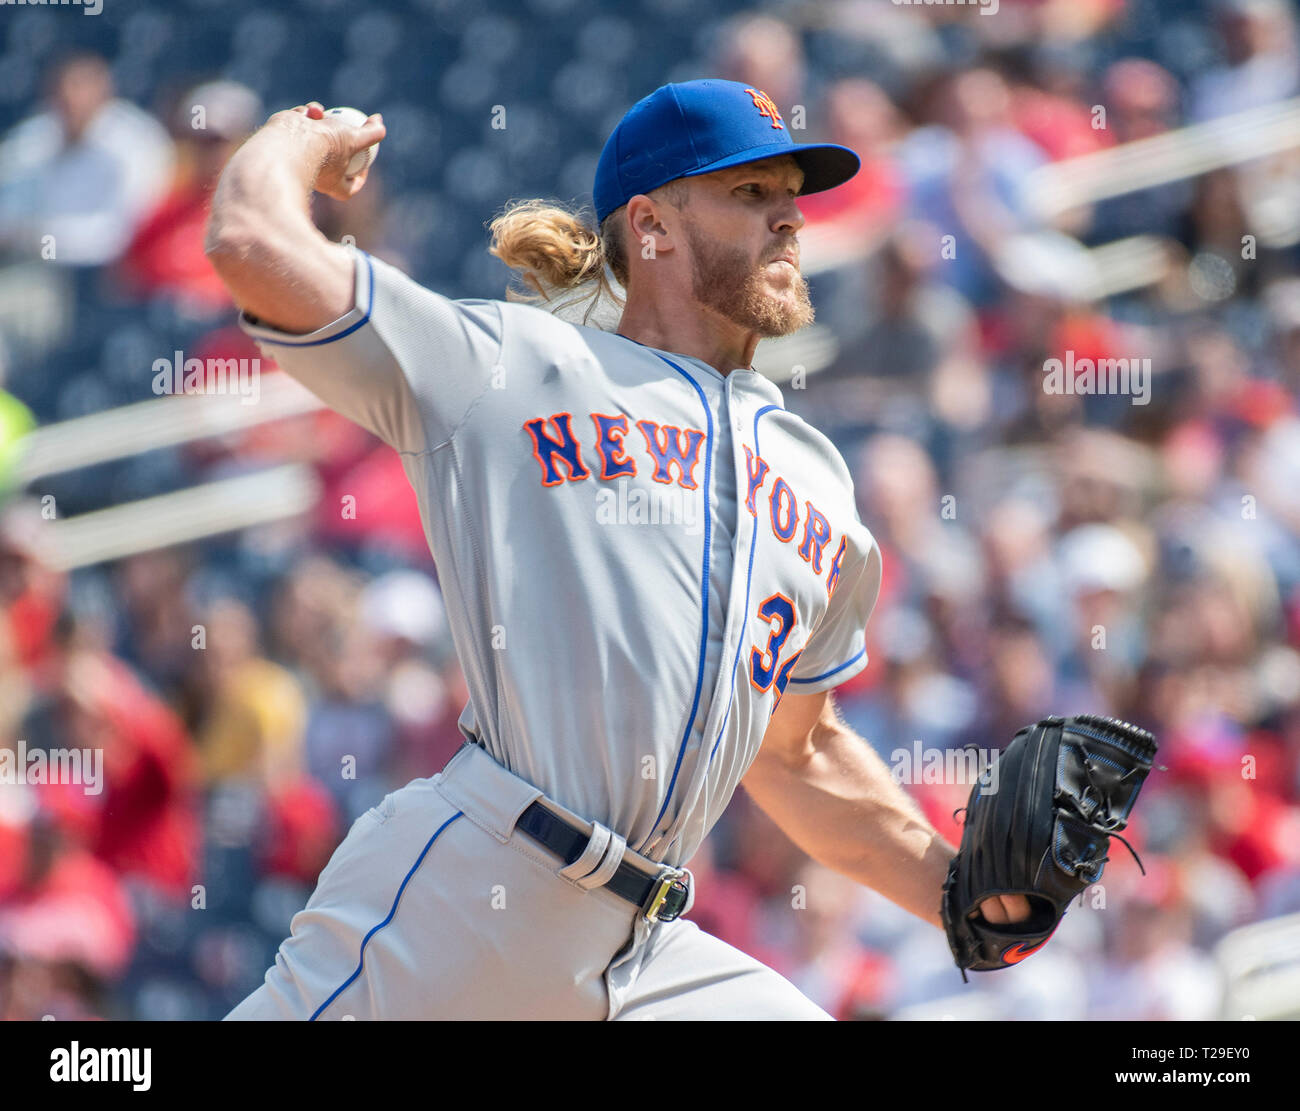 Washington, United States Of America. 30th Mar, 2019. New York Mets starting pitcher Noah Syndergaard (34) works in the first inning against the Washington Nationals at Nationals Park in Washington, DC on March 30, 2018. Credit: Ron Sachs/CNP (RESTRICTION: NO New York or New Jersey Newspapers or newspapers within a 75 mile radius of New York City) | usage worldwide Credit: dpa/Alamy Live News Stock Photo